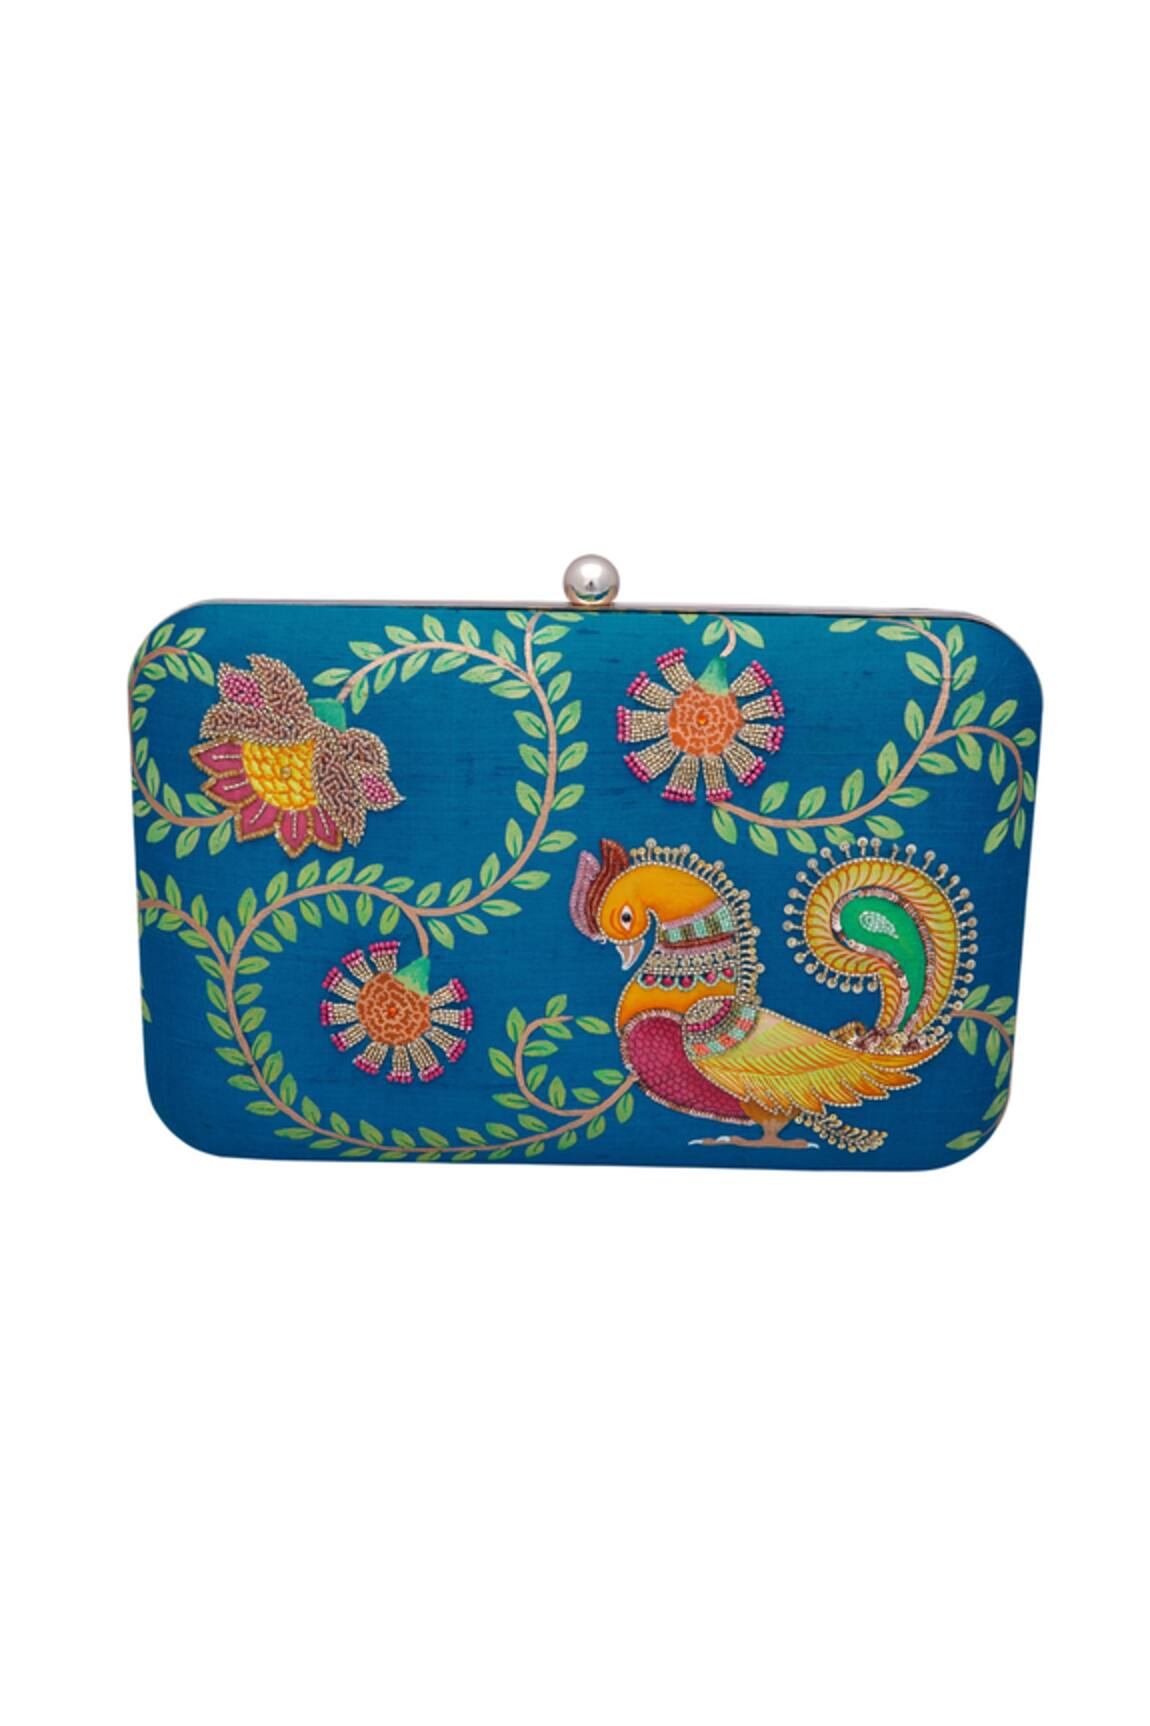 Crazy Palette Turquoise blue hand painted clutch